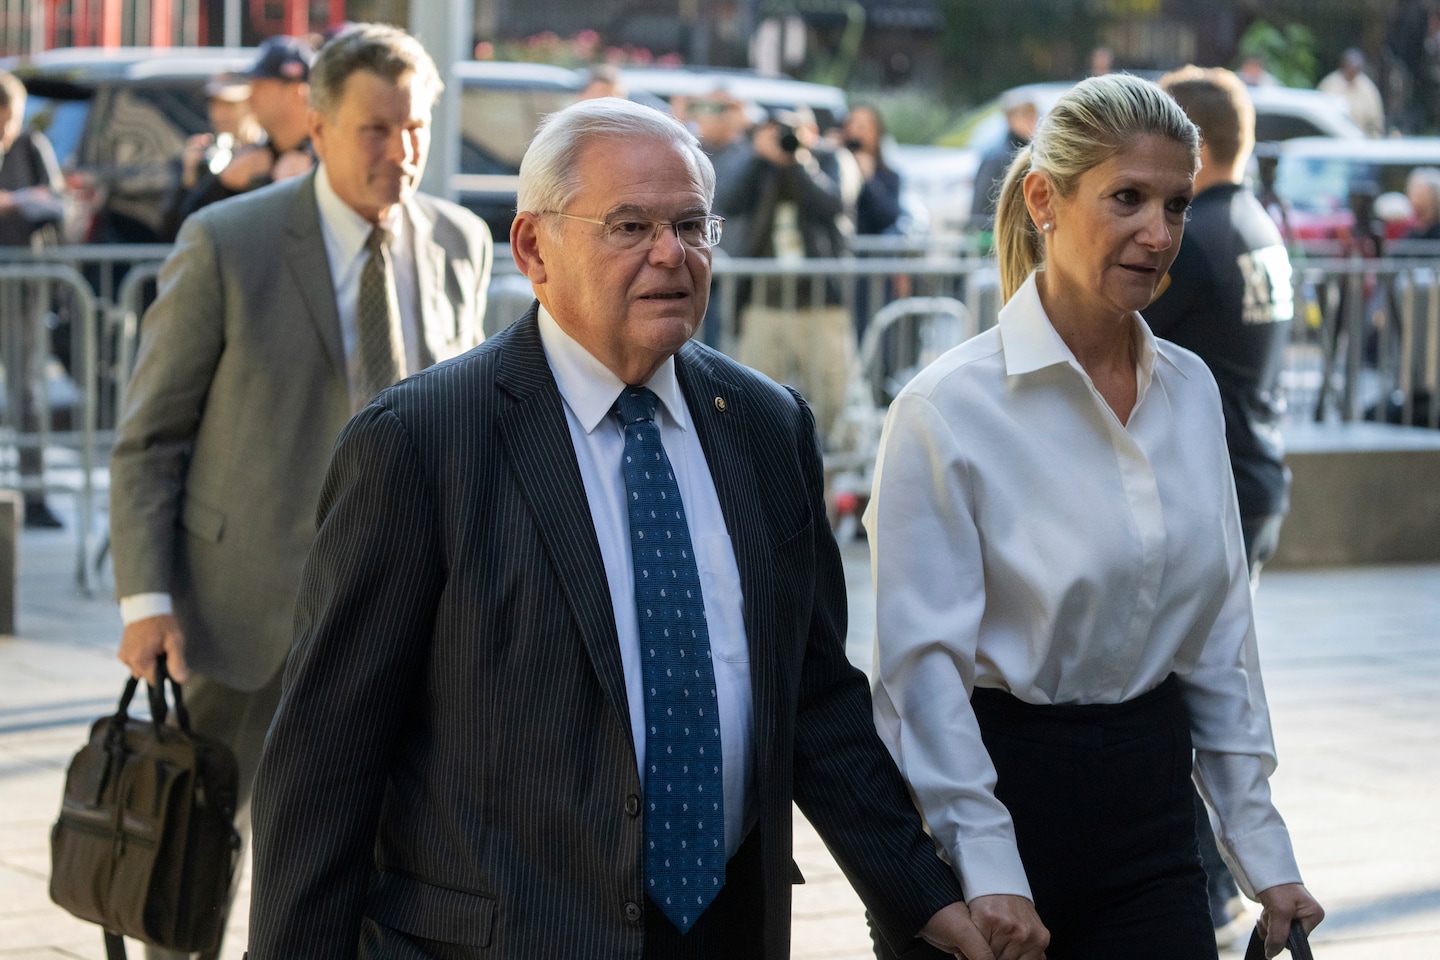 Bob Menendez's legal strategy may include blaming his wife, the filing said